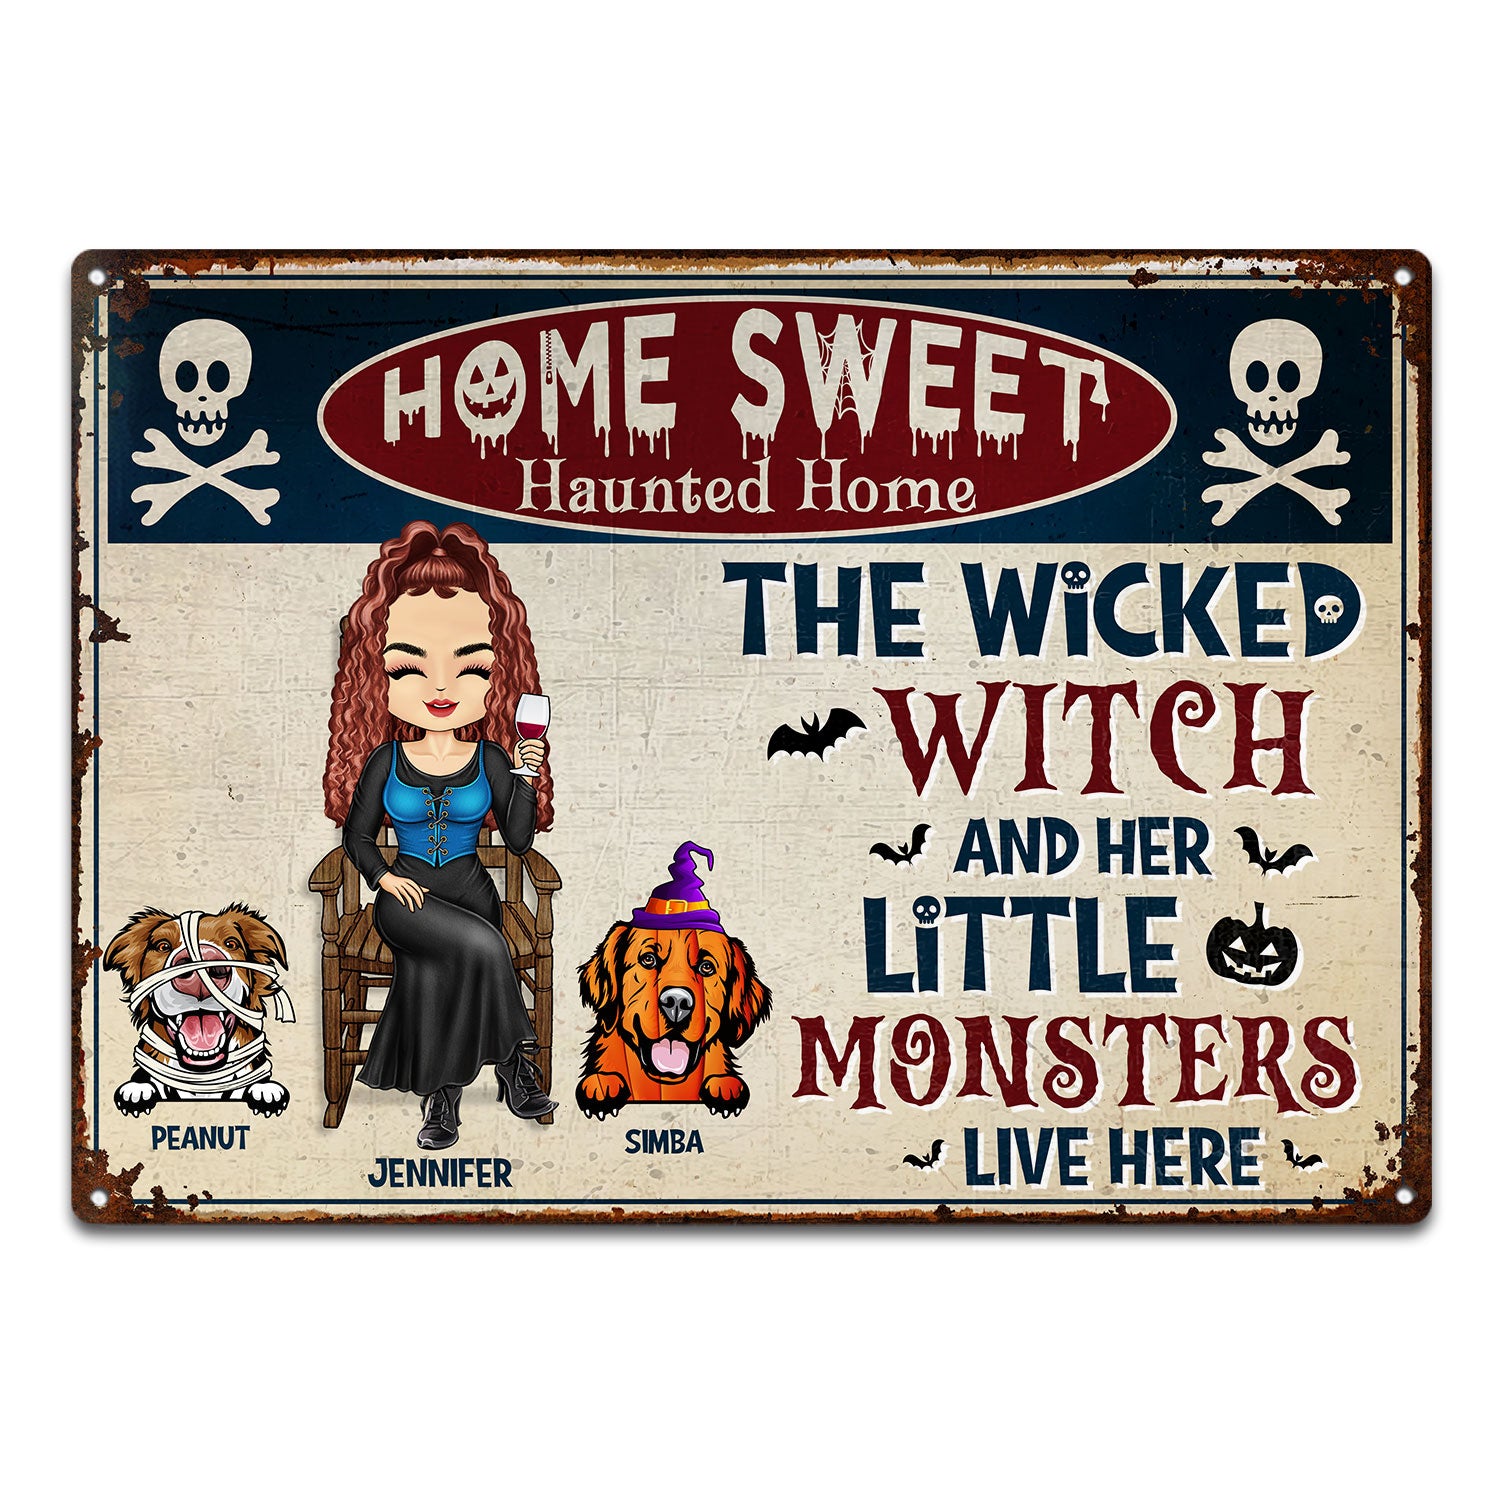 The Wicked Witch And Her Little Monsters Live Here - Backyard Sign, Halloween Home Decor Gift For Dog Lovers - Personalized Classic Metal Signs